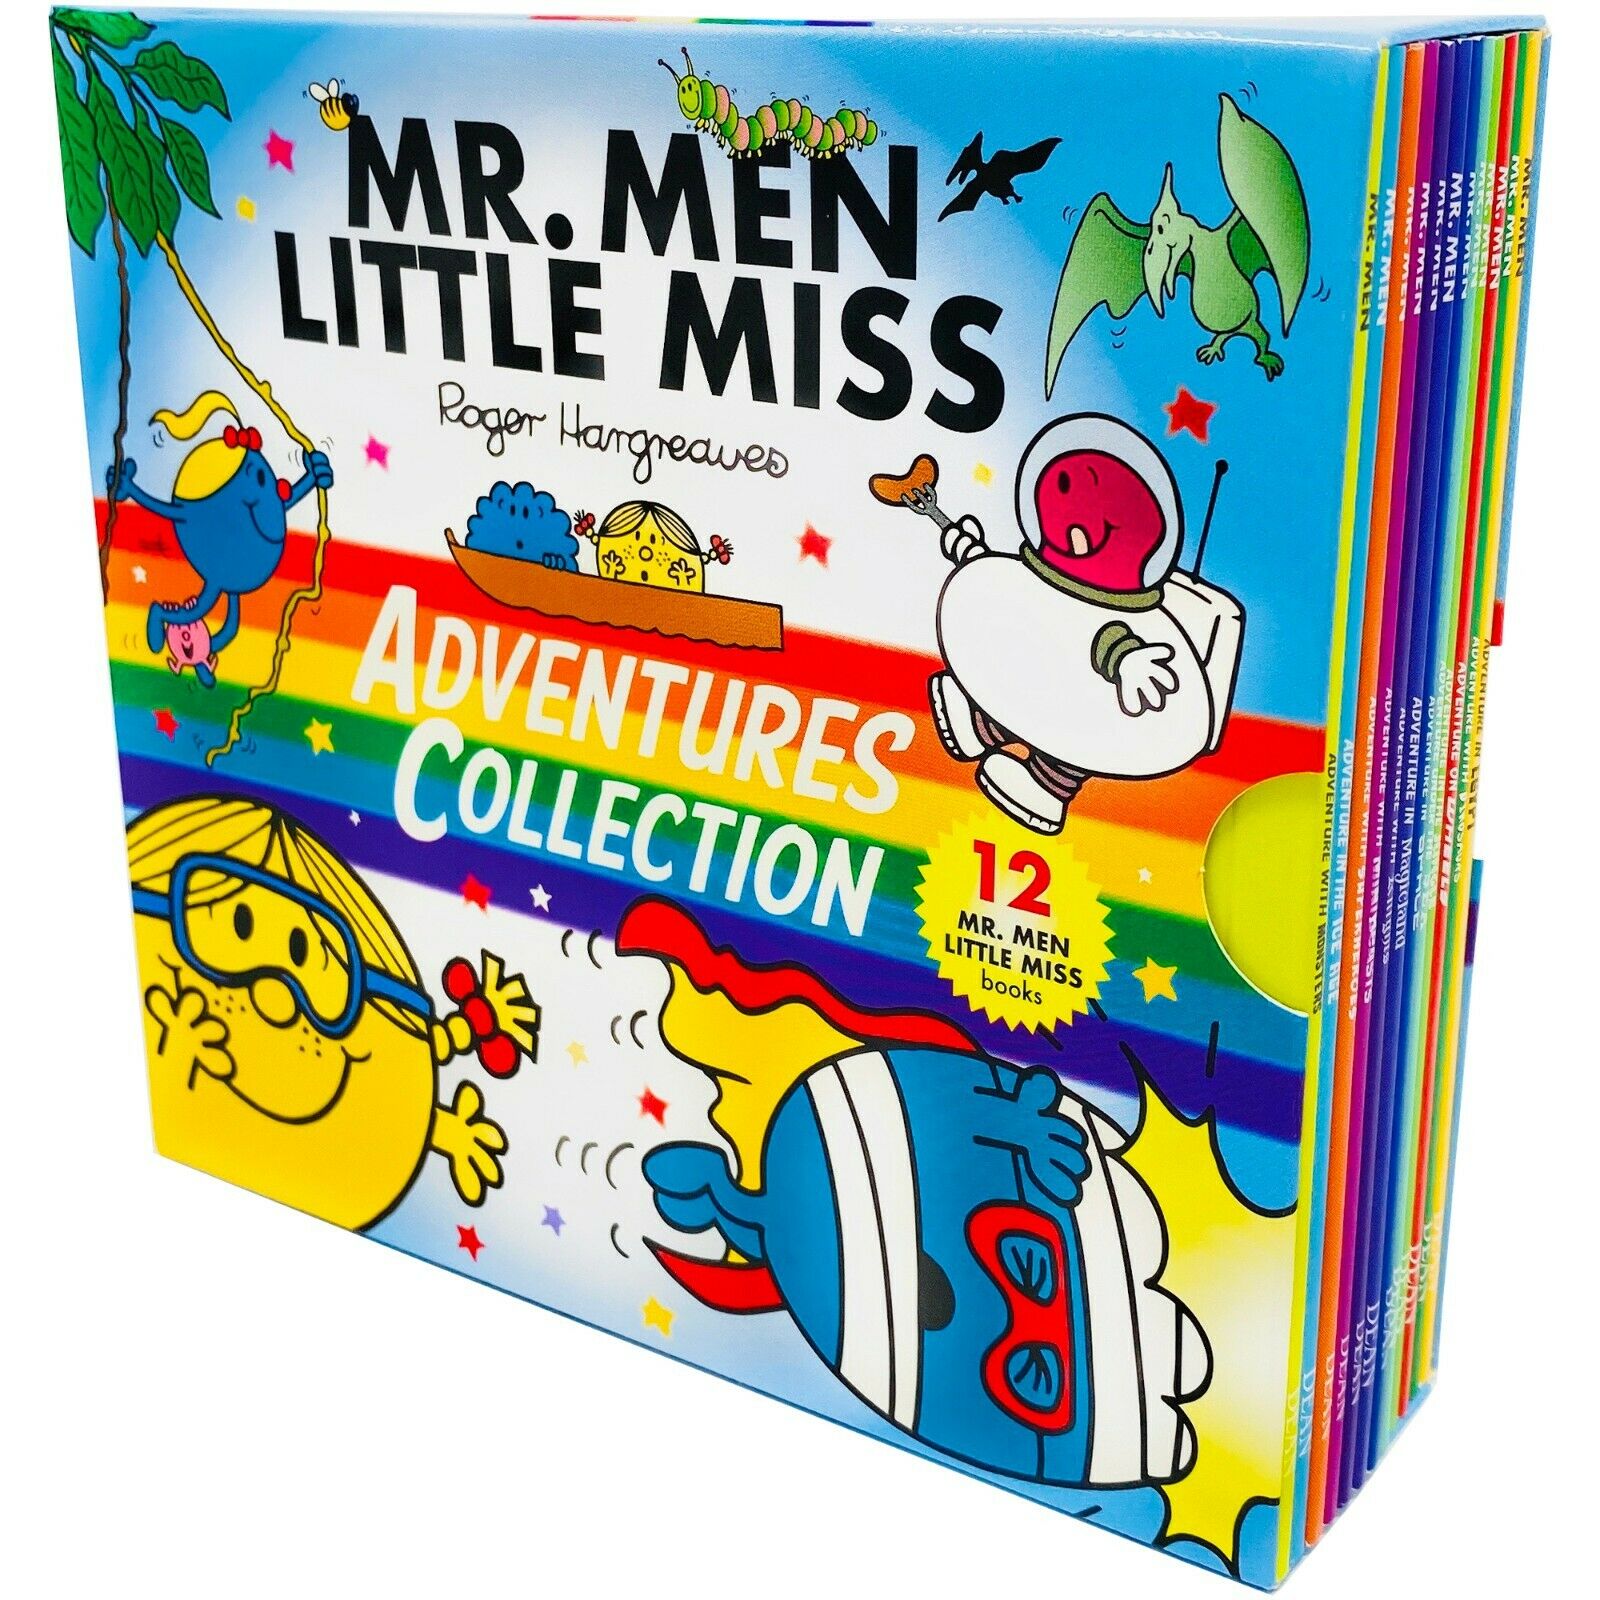 little miss and mister online games little miss games and mr. man